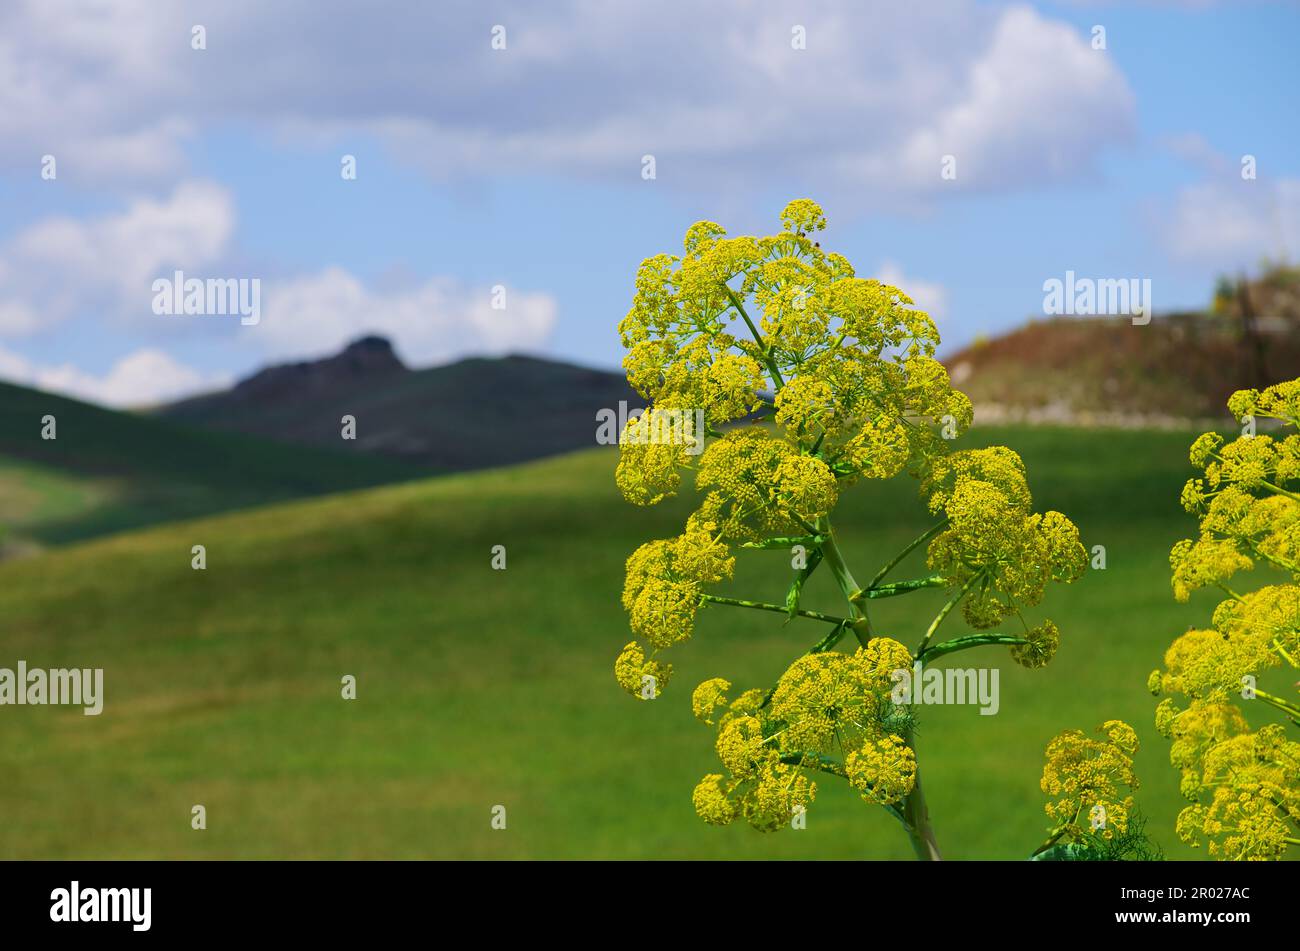 spring yellow wildflowers field and out focus rural landscape in Sicily, Italy Stock Photo